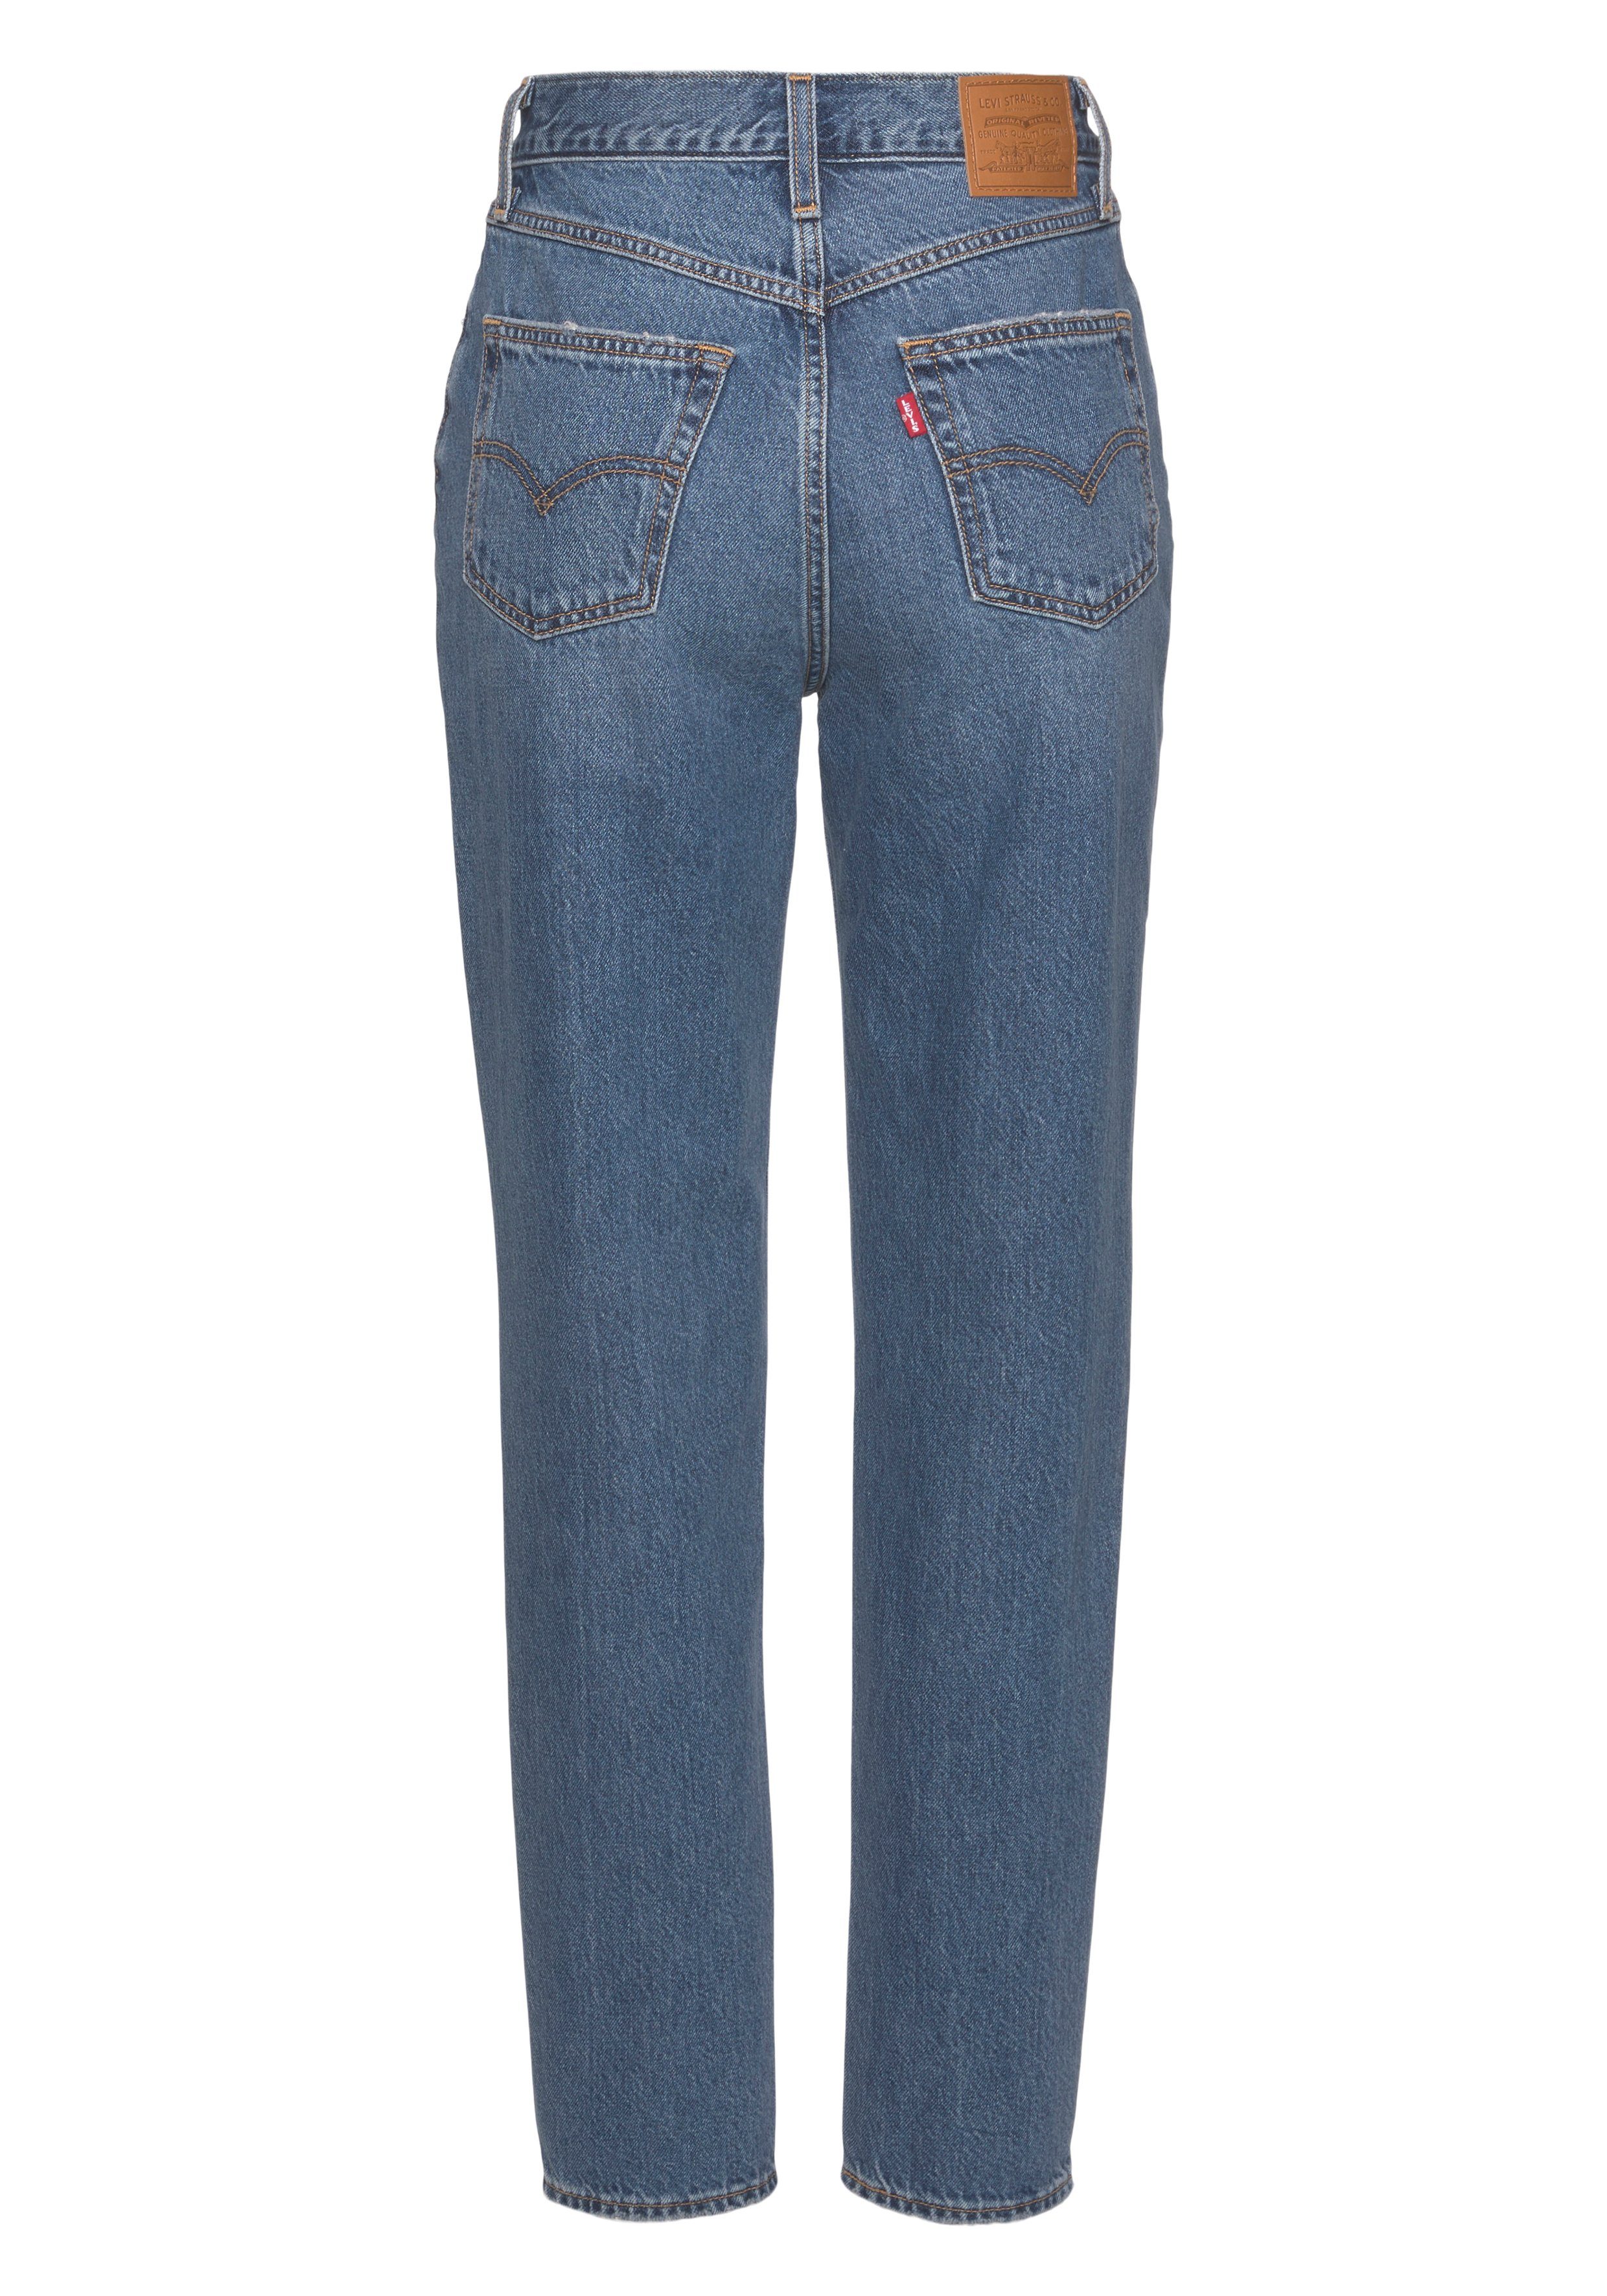 JEANS denim MOM 80S mid-blue Mom-Jeans Levi's®